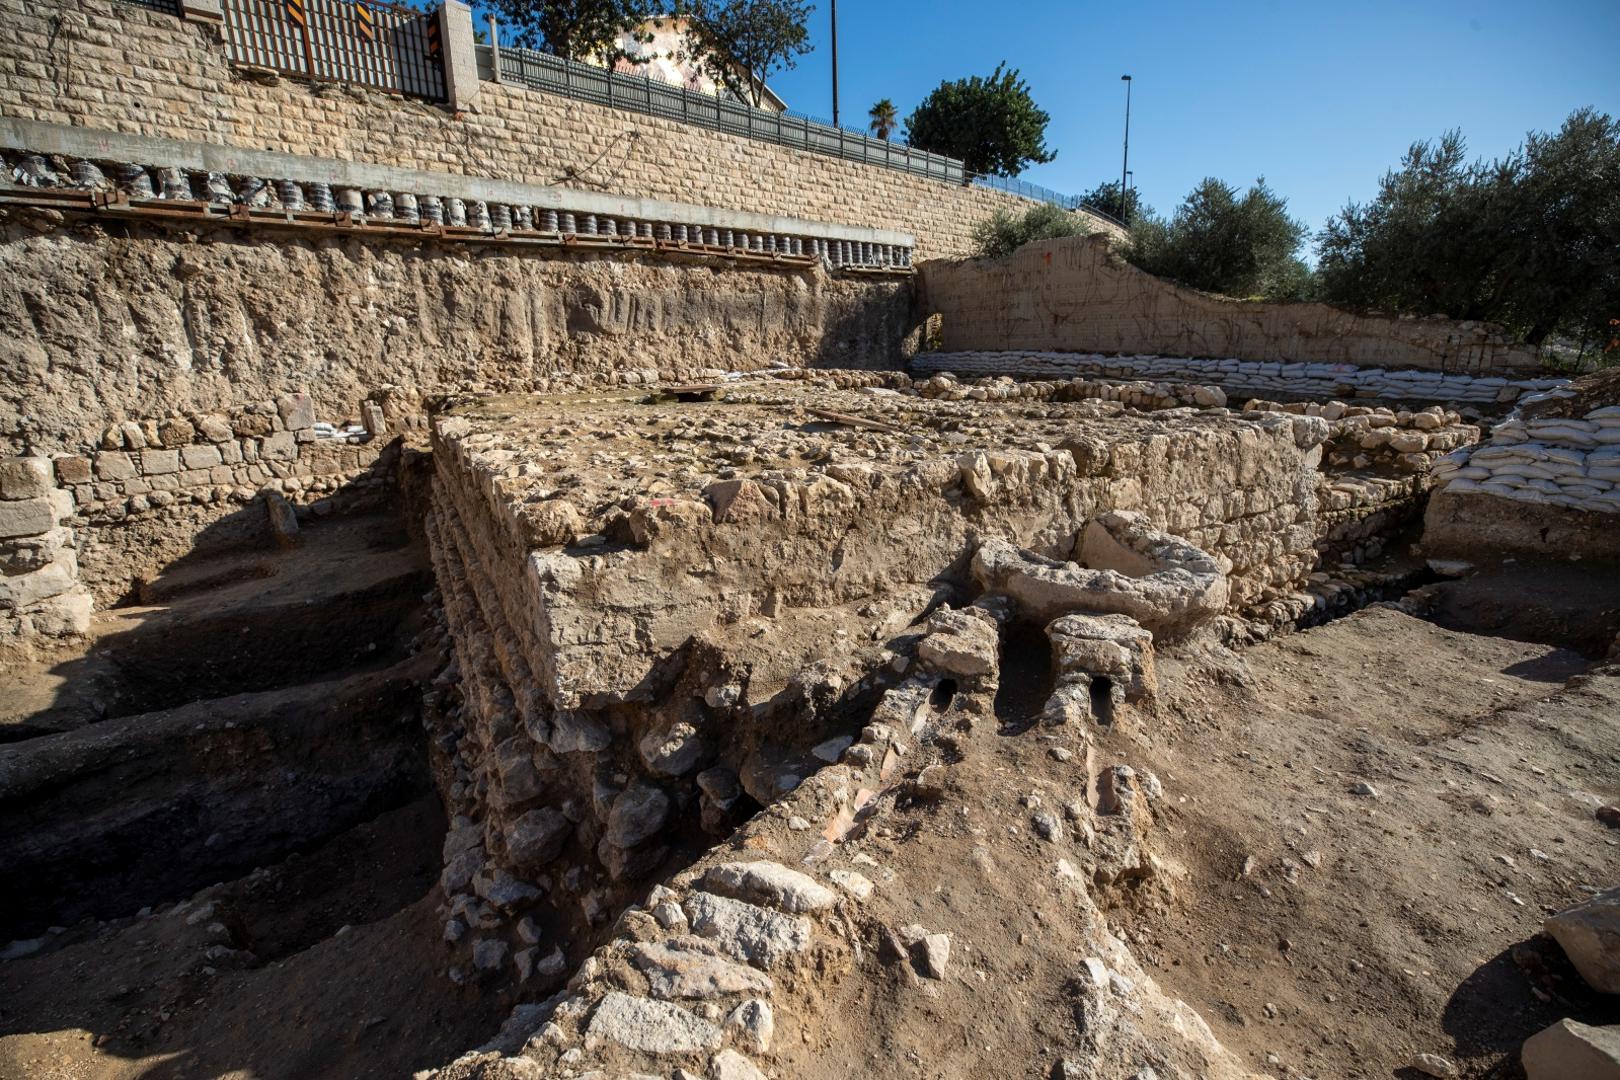 A view shows the remains of a previously unknown church that was founded at the end of the Byzantine period and a 2000-year-old ritual bath discovered in Jerusalem A view shows the remains of a previously unknown church that was founded at the end of the Byzantine period and a 2000-year-old ritual bath discovered at the Garden of Gethsemane church, in Jerusalem, December 21, 2020. Atef Safadi/Pool via REUTERS POOL